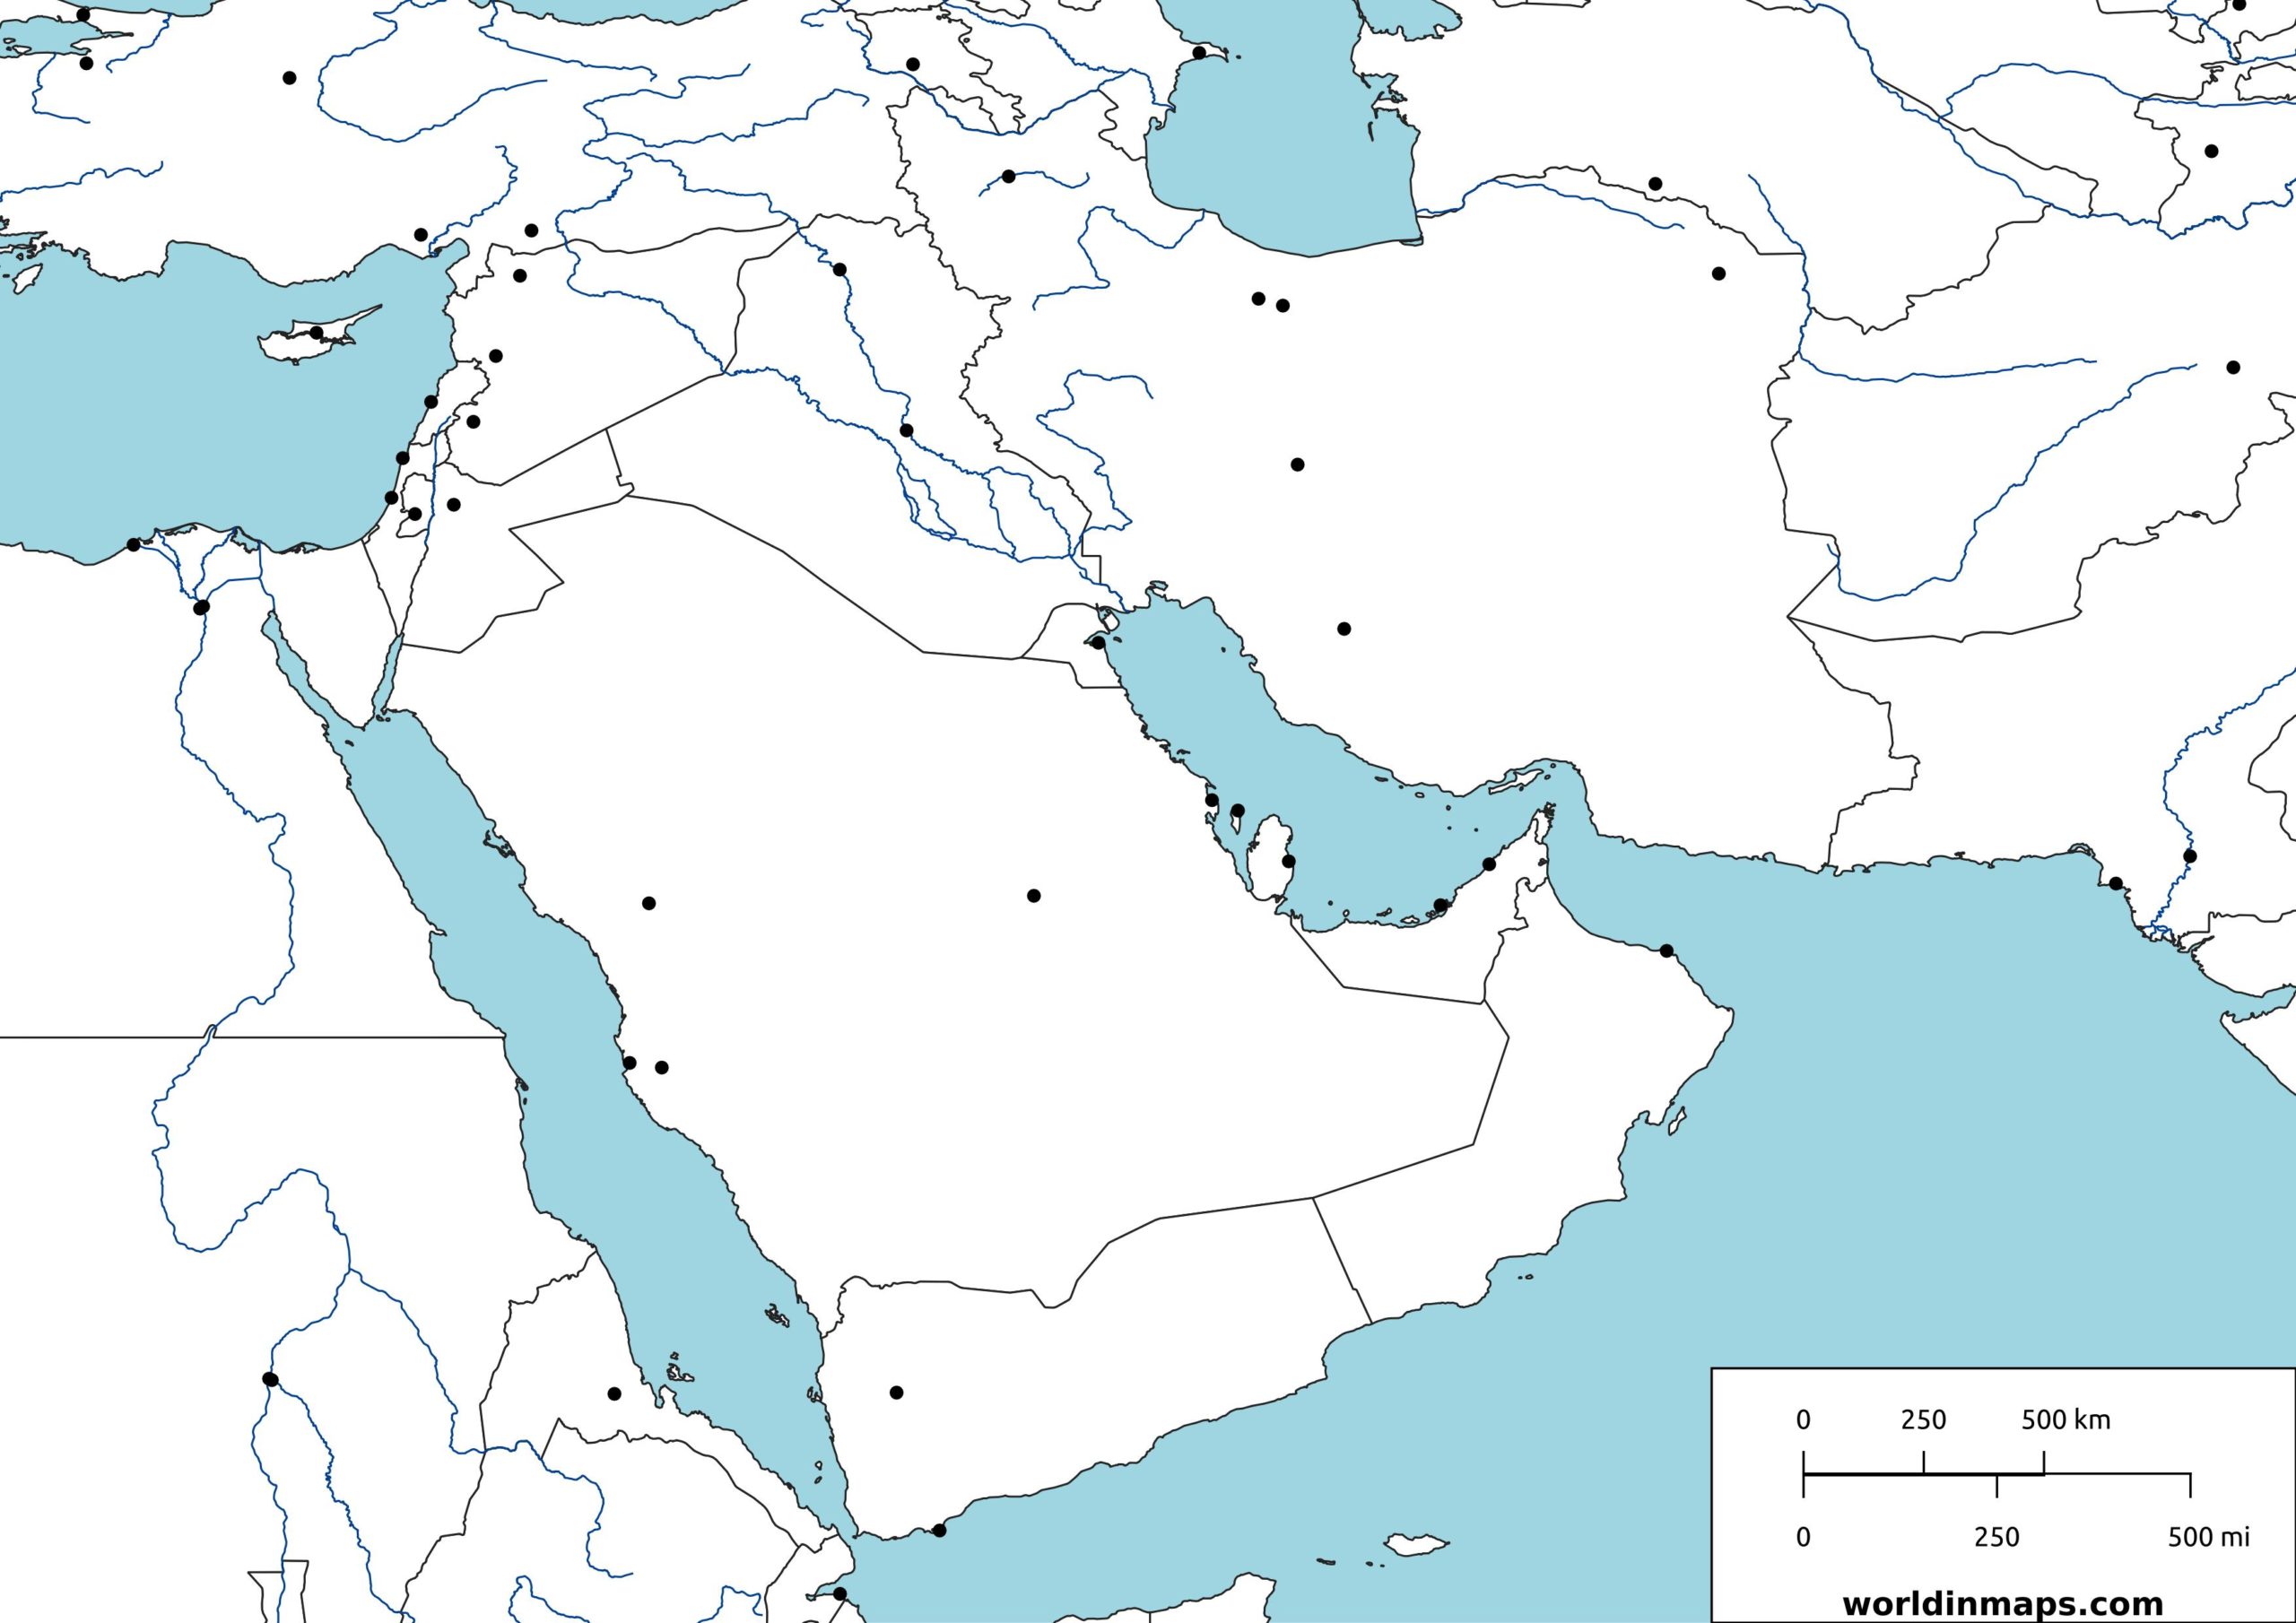 Middle East World In Maps